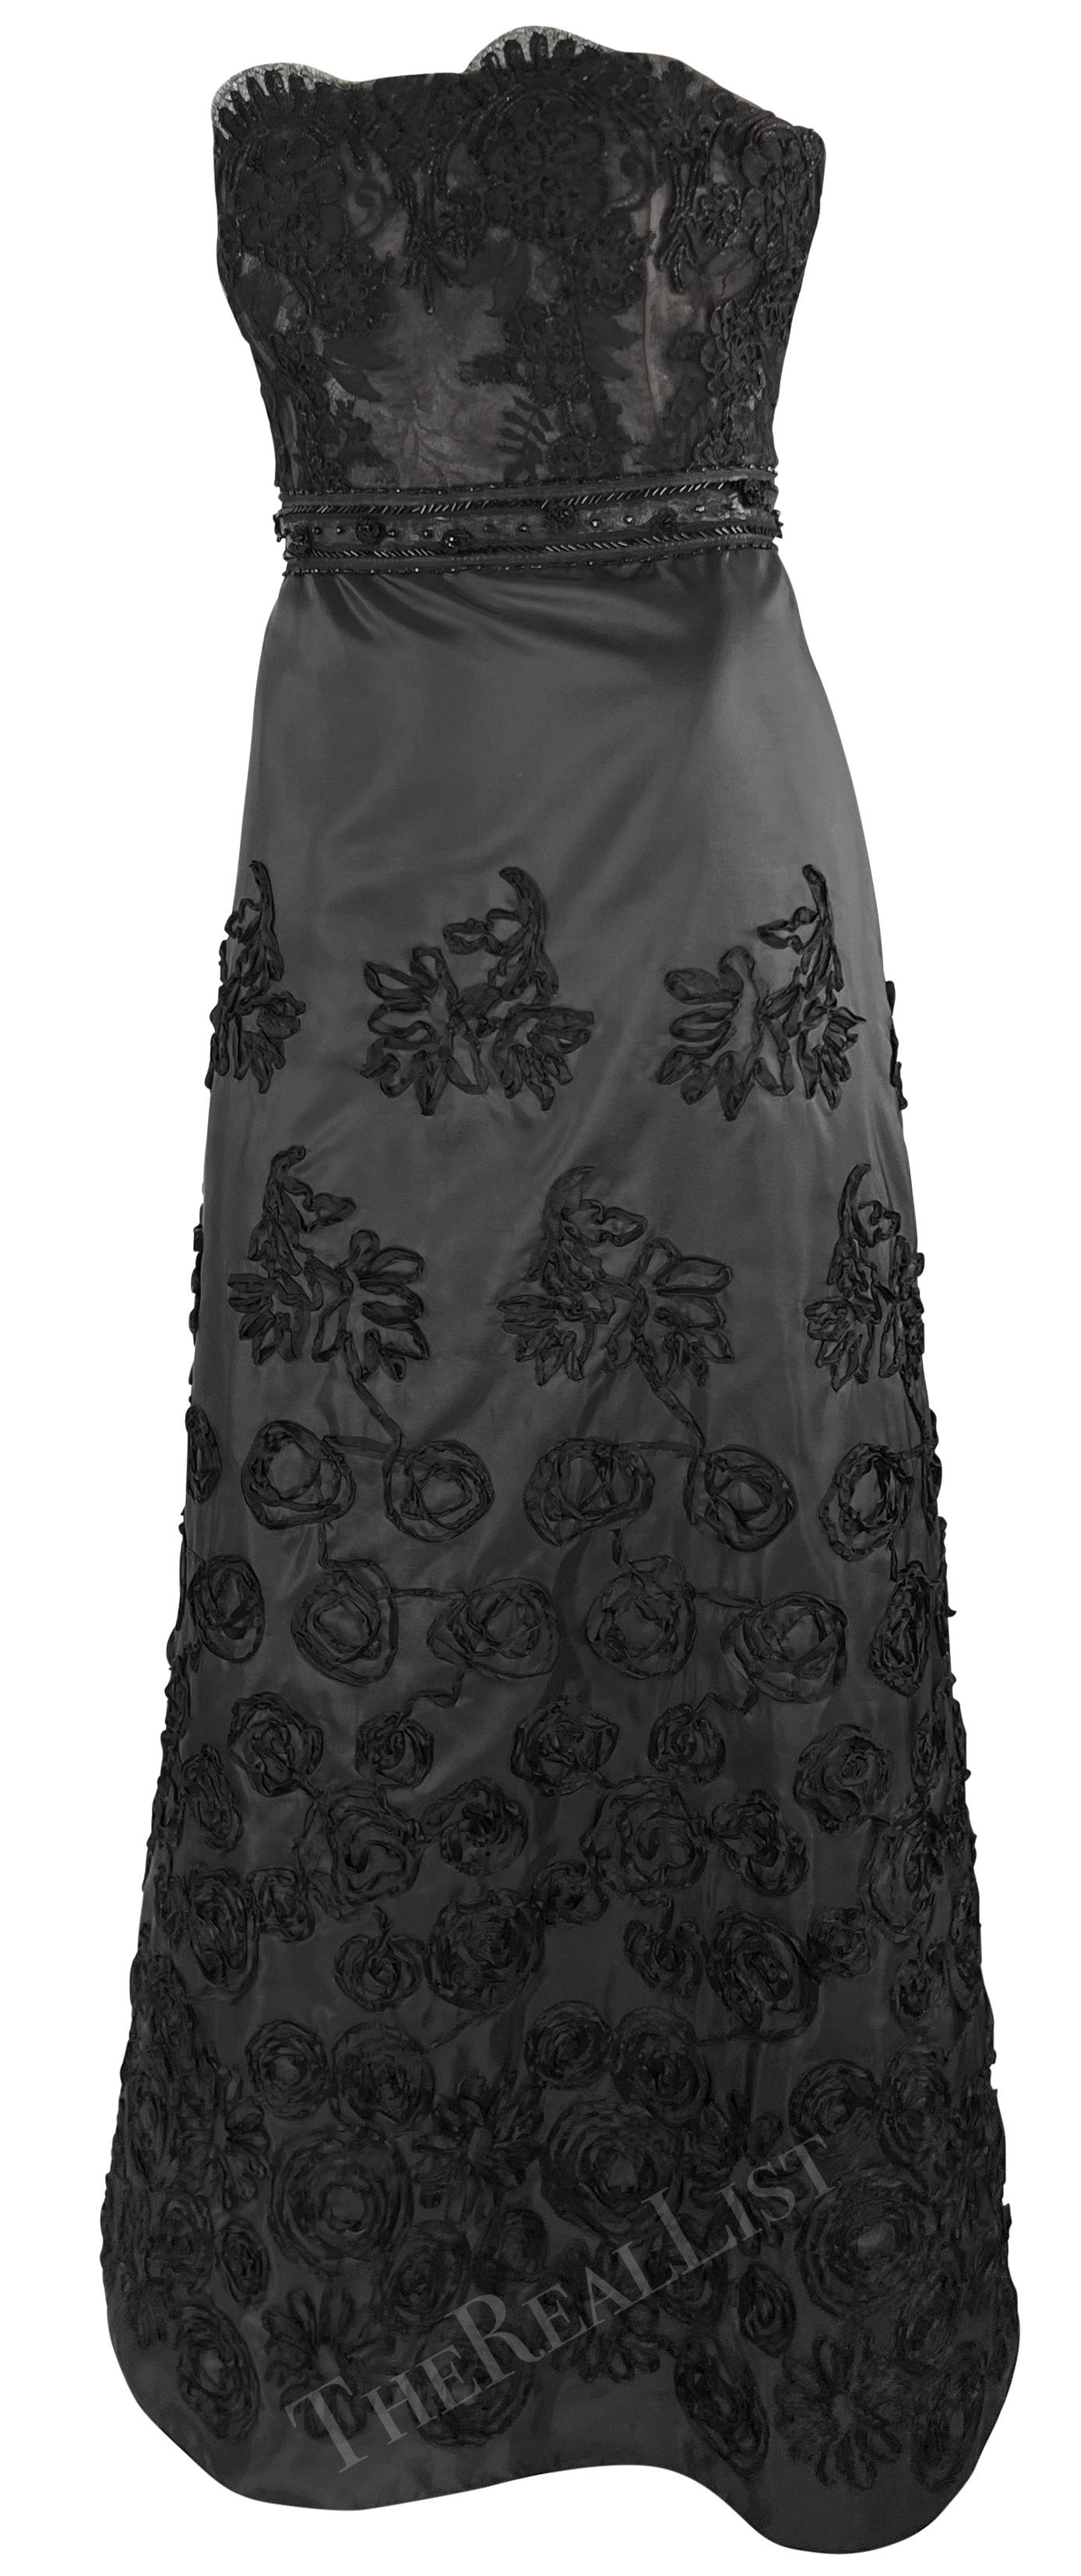 S/S 1999 Christian Lacroix Beaded Lace Overlay Strapless Taffeta Evening Gown In Good Condition For Sale In West Hollywood, CA